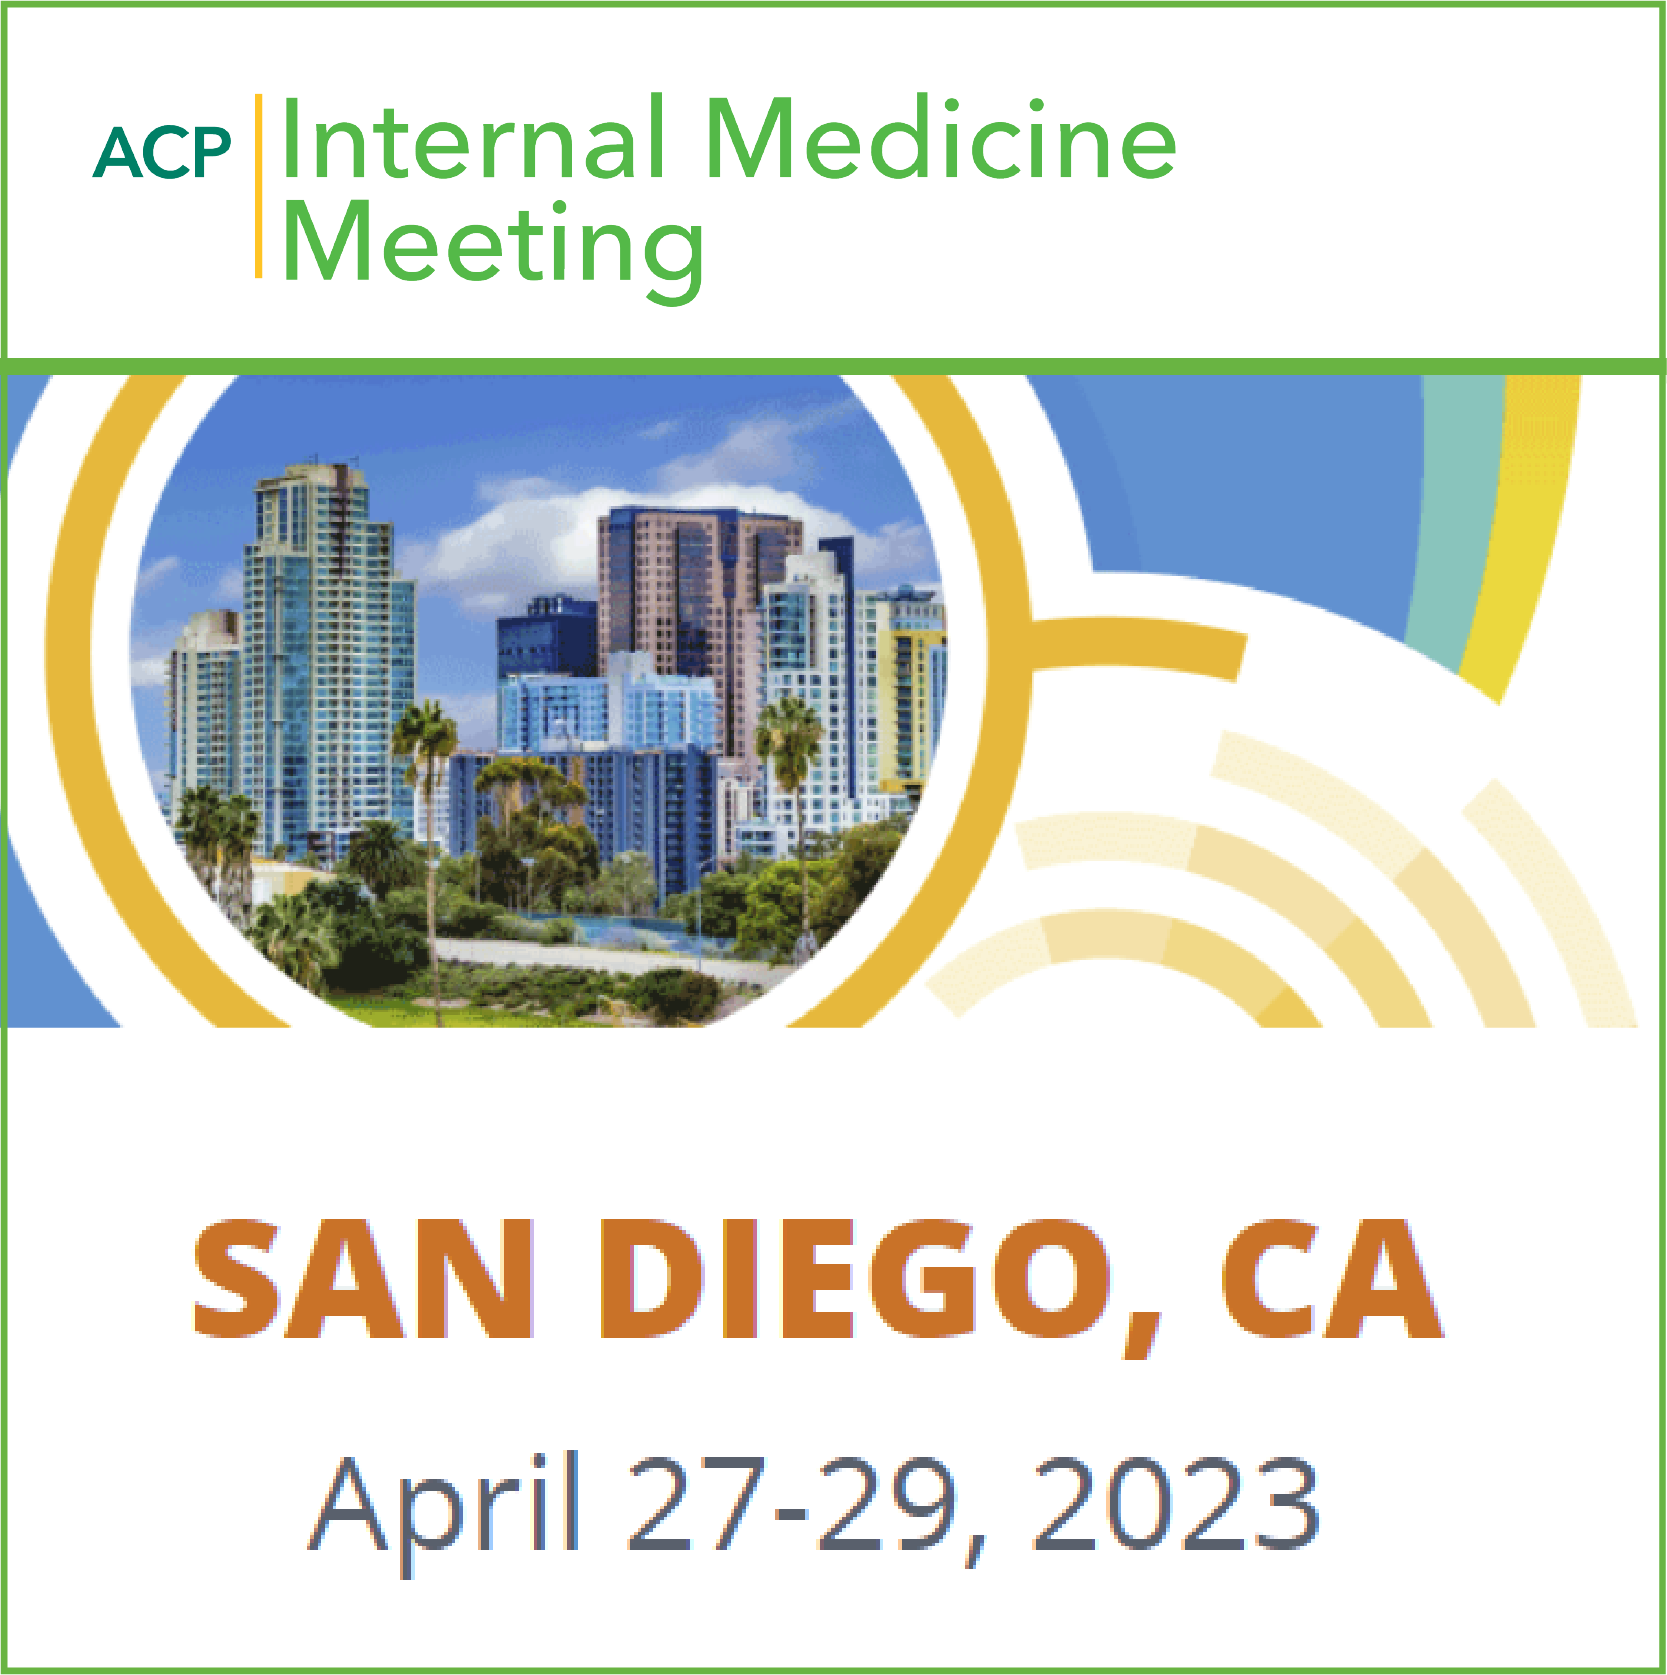 AMERICAN COLLEGE OF PHYSICIANS INTERNAL MEDICINE MEETING - ACP 2023